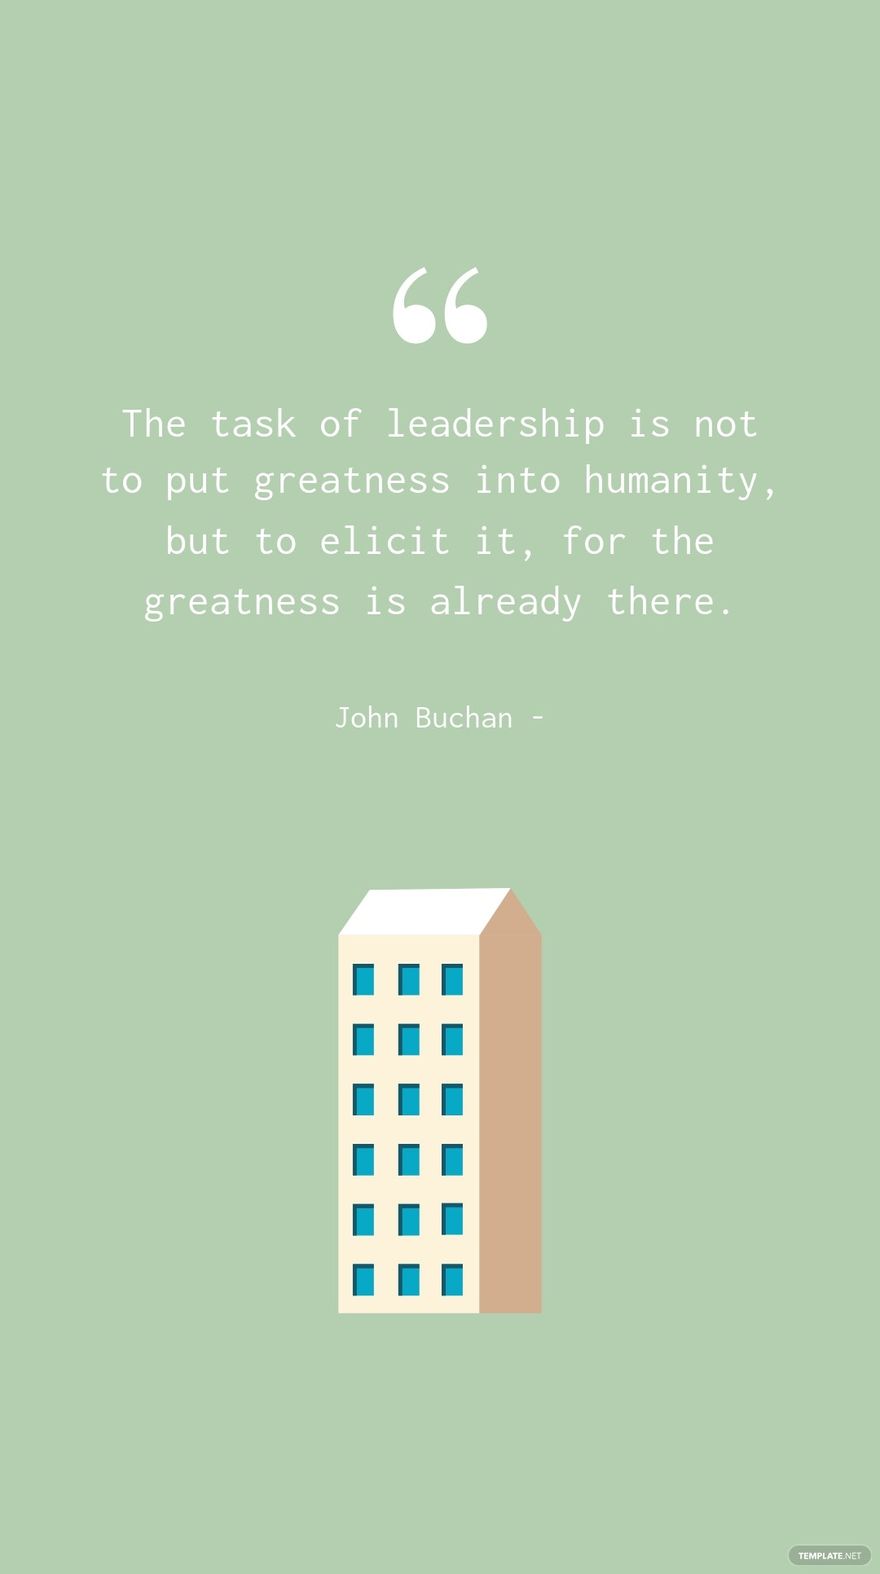 John Buchan - The task of leadership is not to put greatness into humanity, but to elicit it, for the greatness is already there.